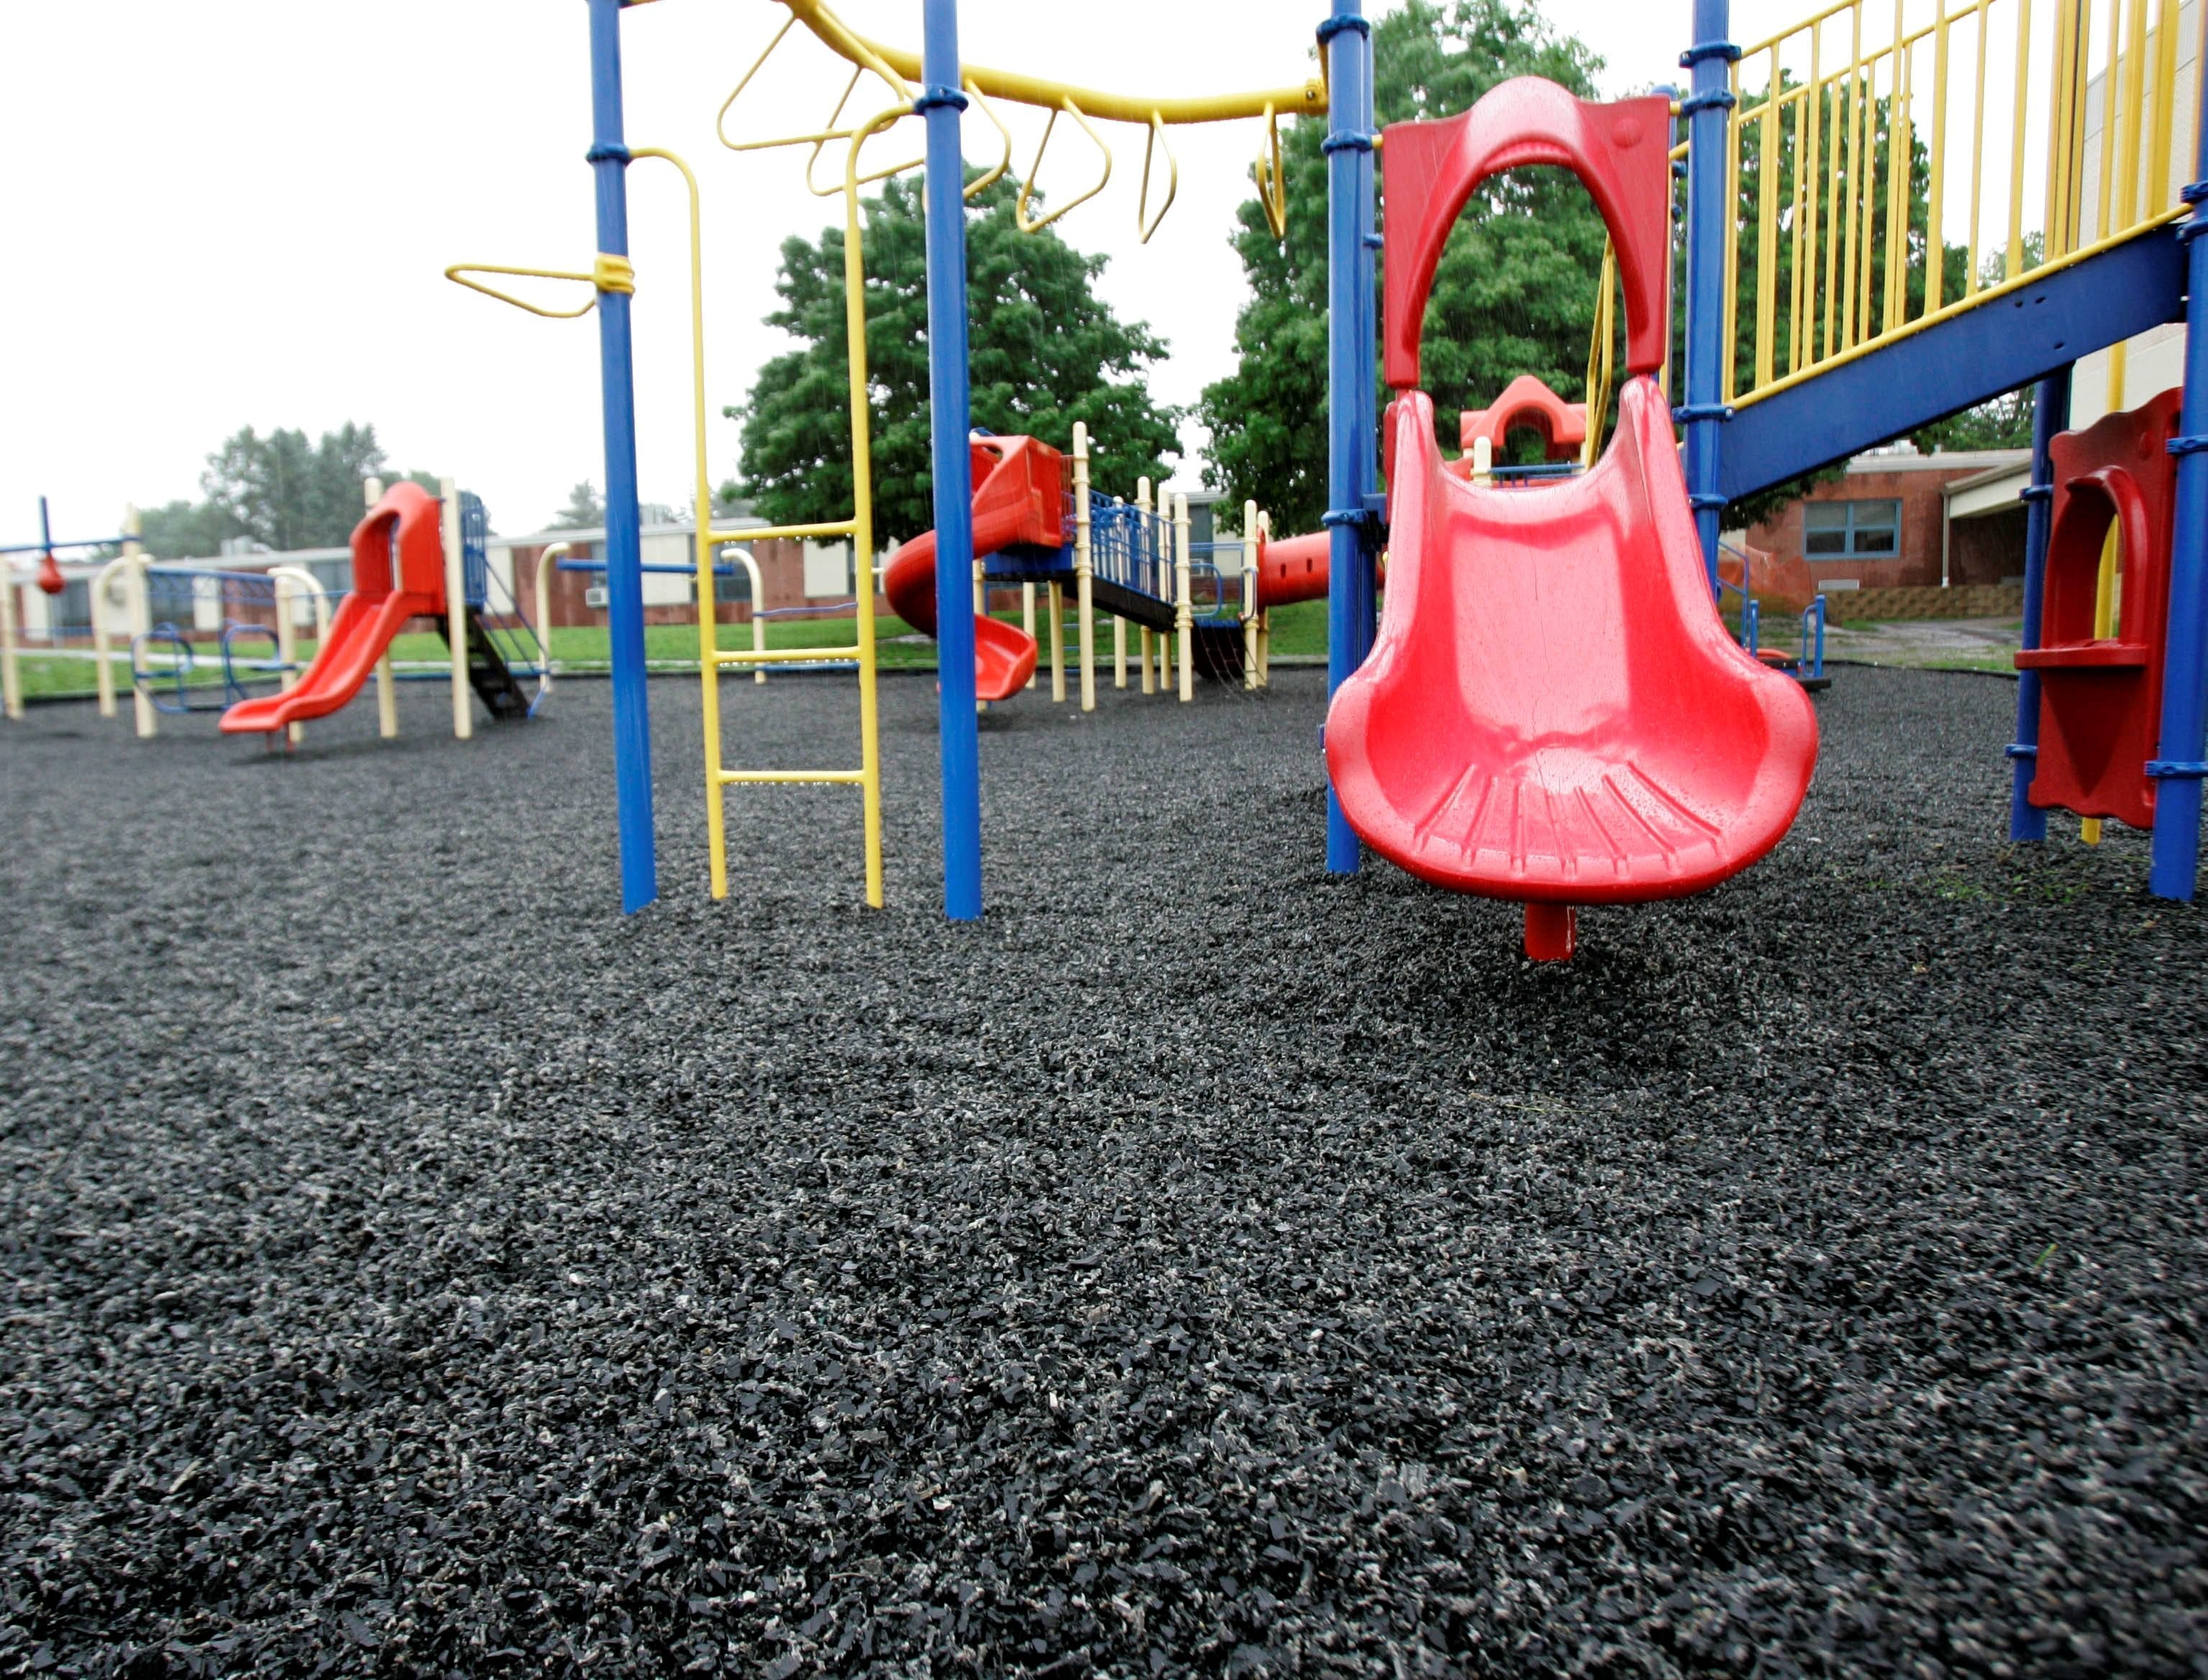 Playground raises issues regarding the division of church and state